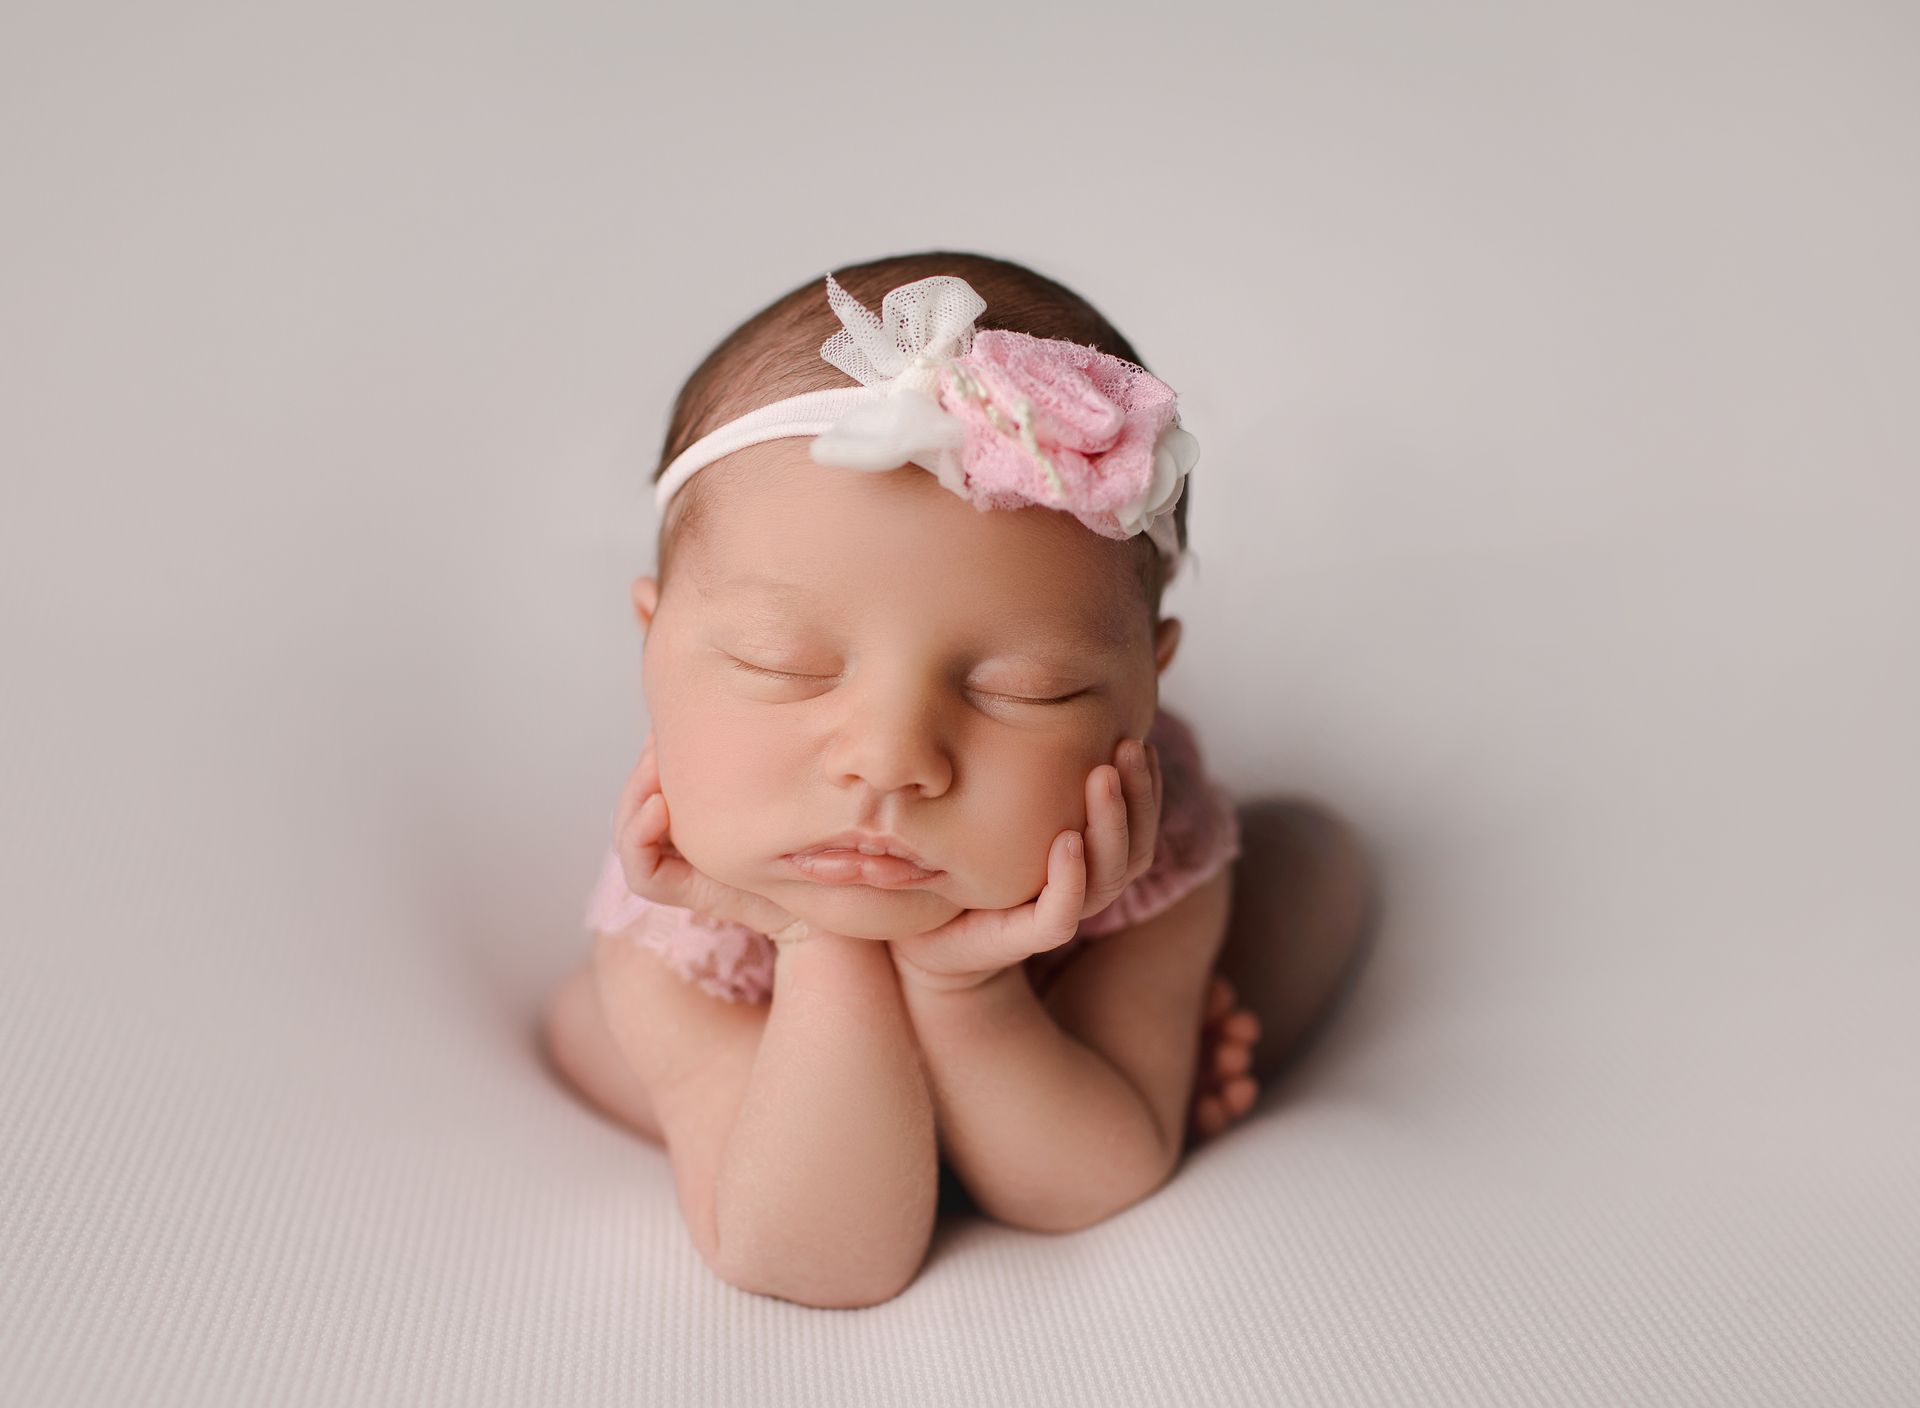 A newborn baby girl wearing a pink headband is sleeping on a white blanket.